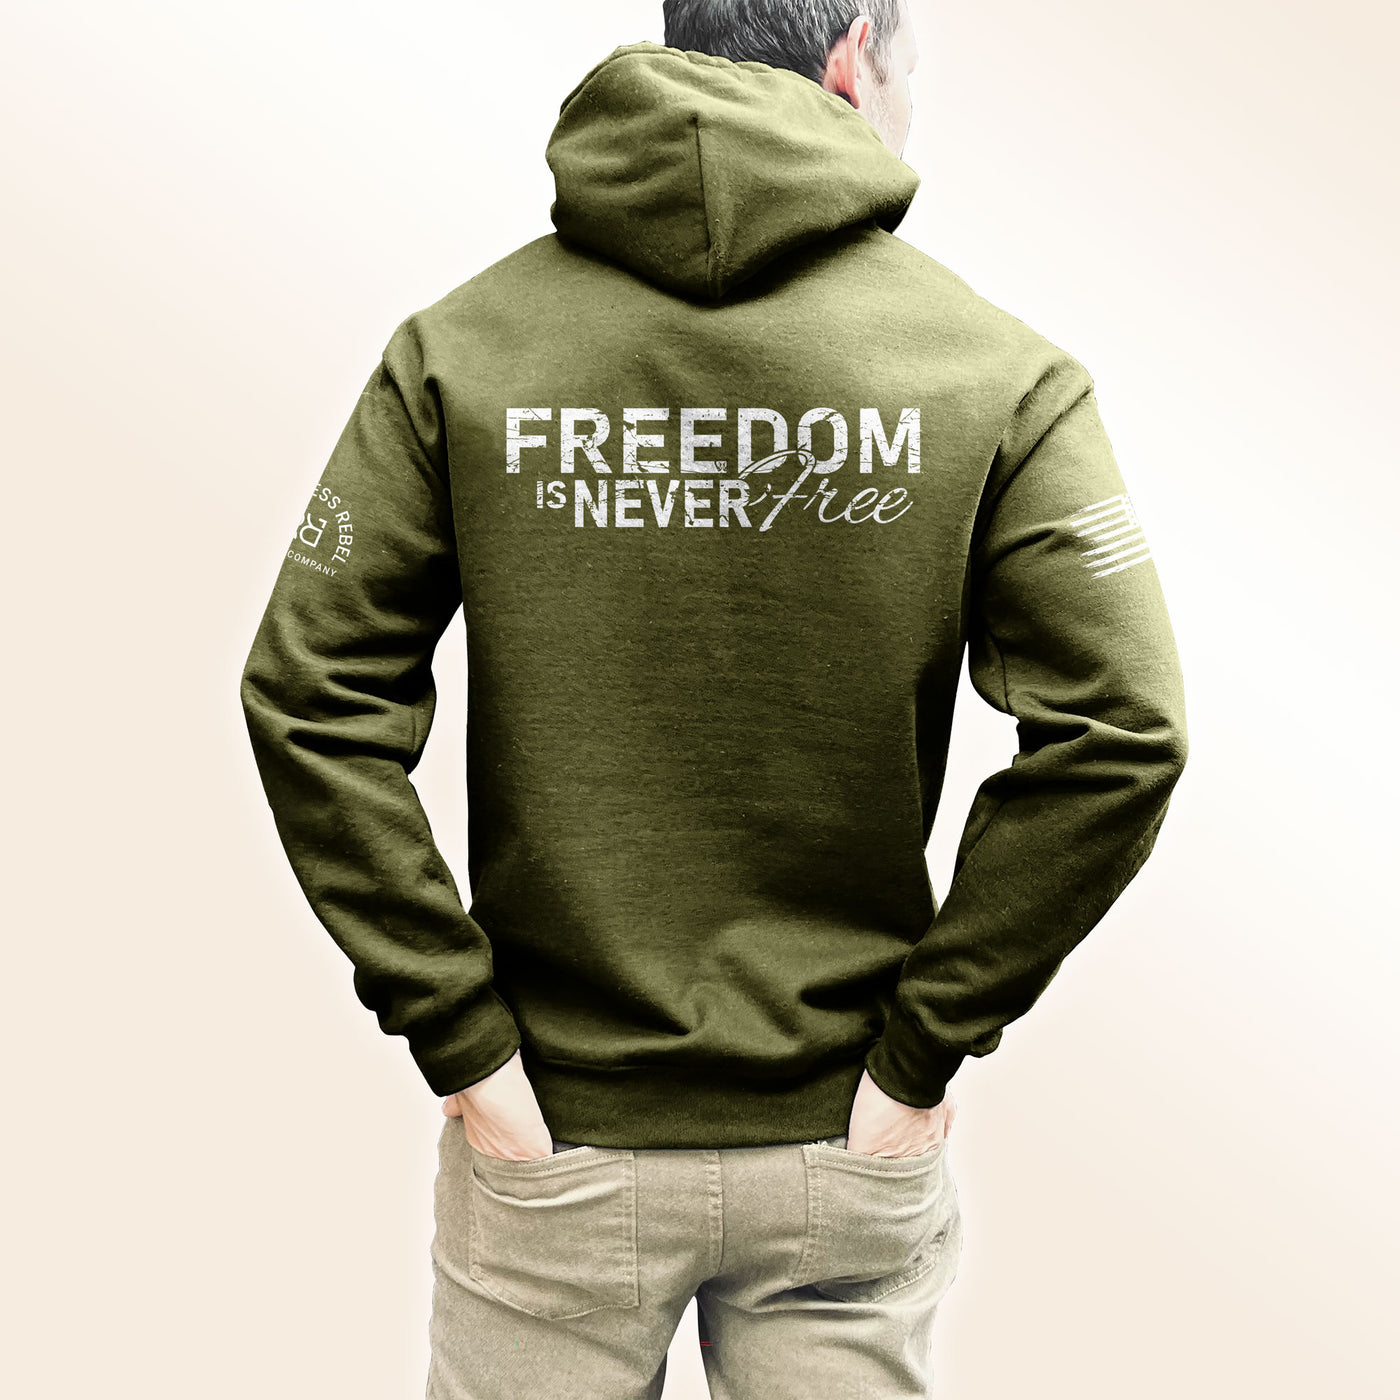 Man wearing Military Green Men's Freedom Is Never Free Back Design Hoodie